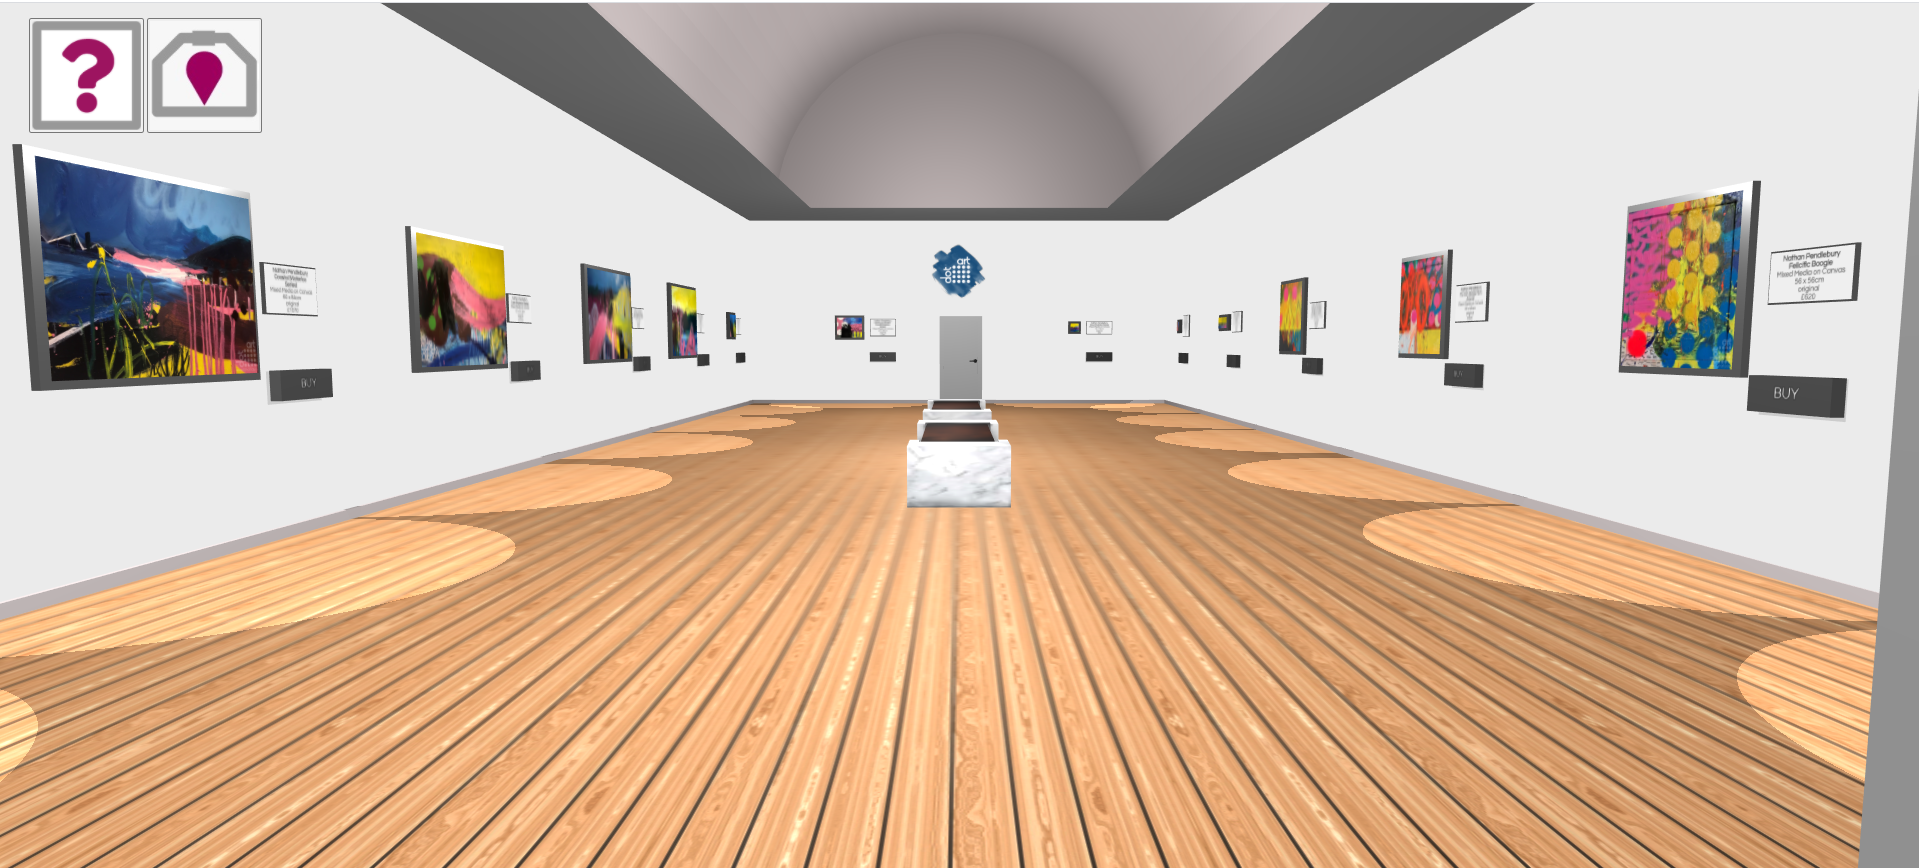 dot art virtual gallery showing images on white walls with a brown floor layout in front